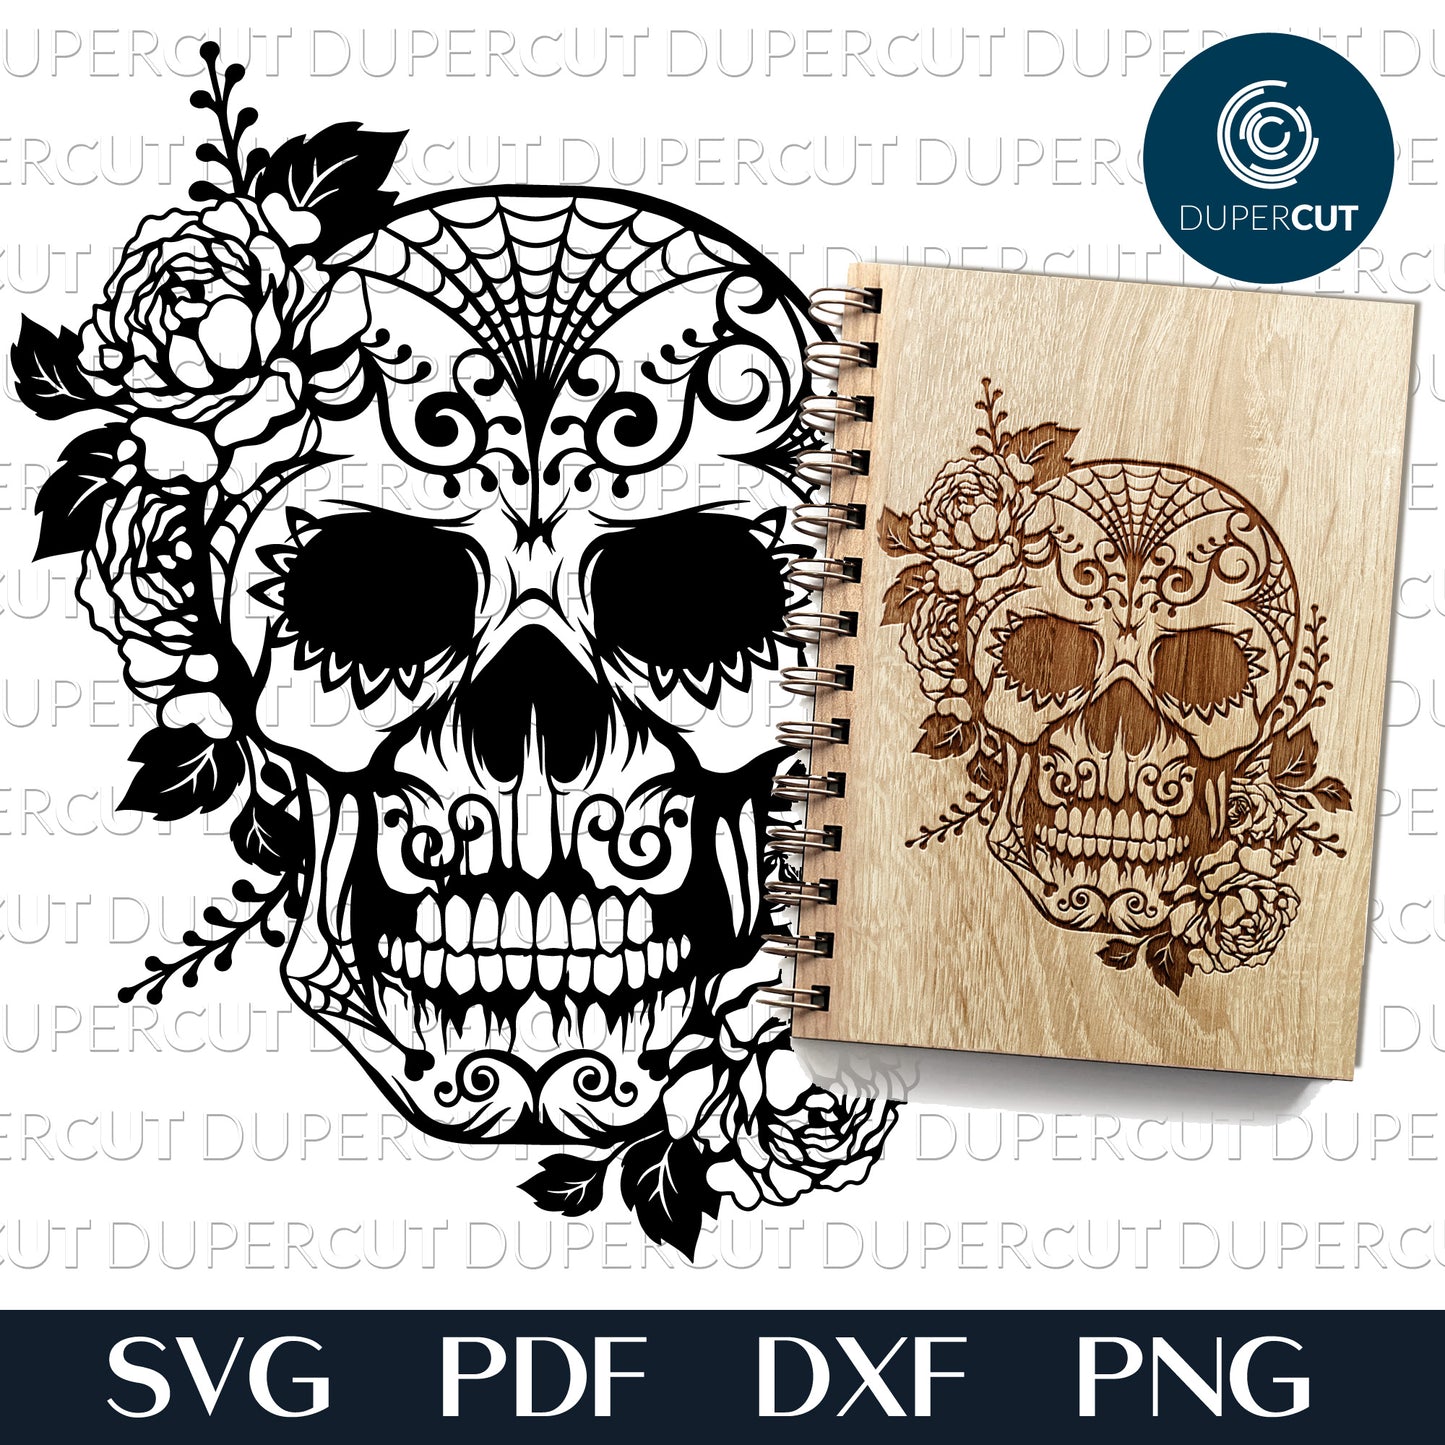 Floral Sugar Skull - SVG DXF PNG laser cutting and engraving files for Cricut, Silhouette Cameo, Glowforge by DuperCut